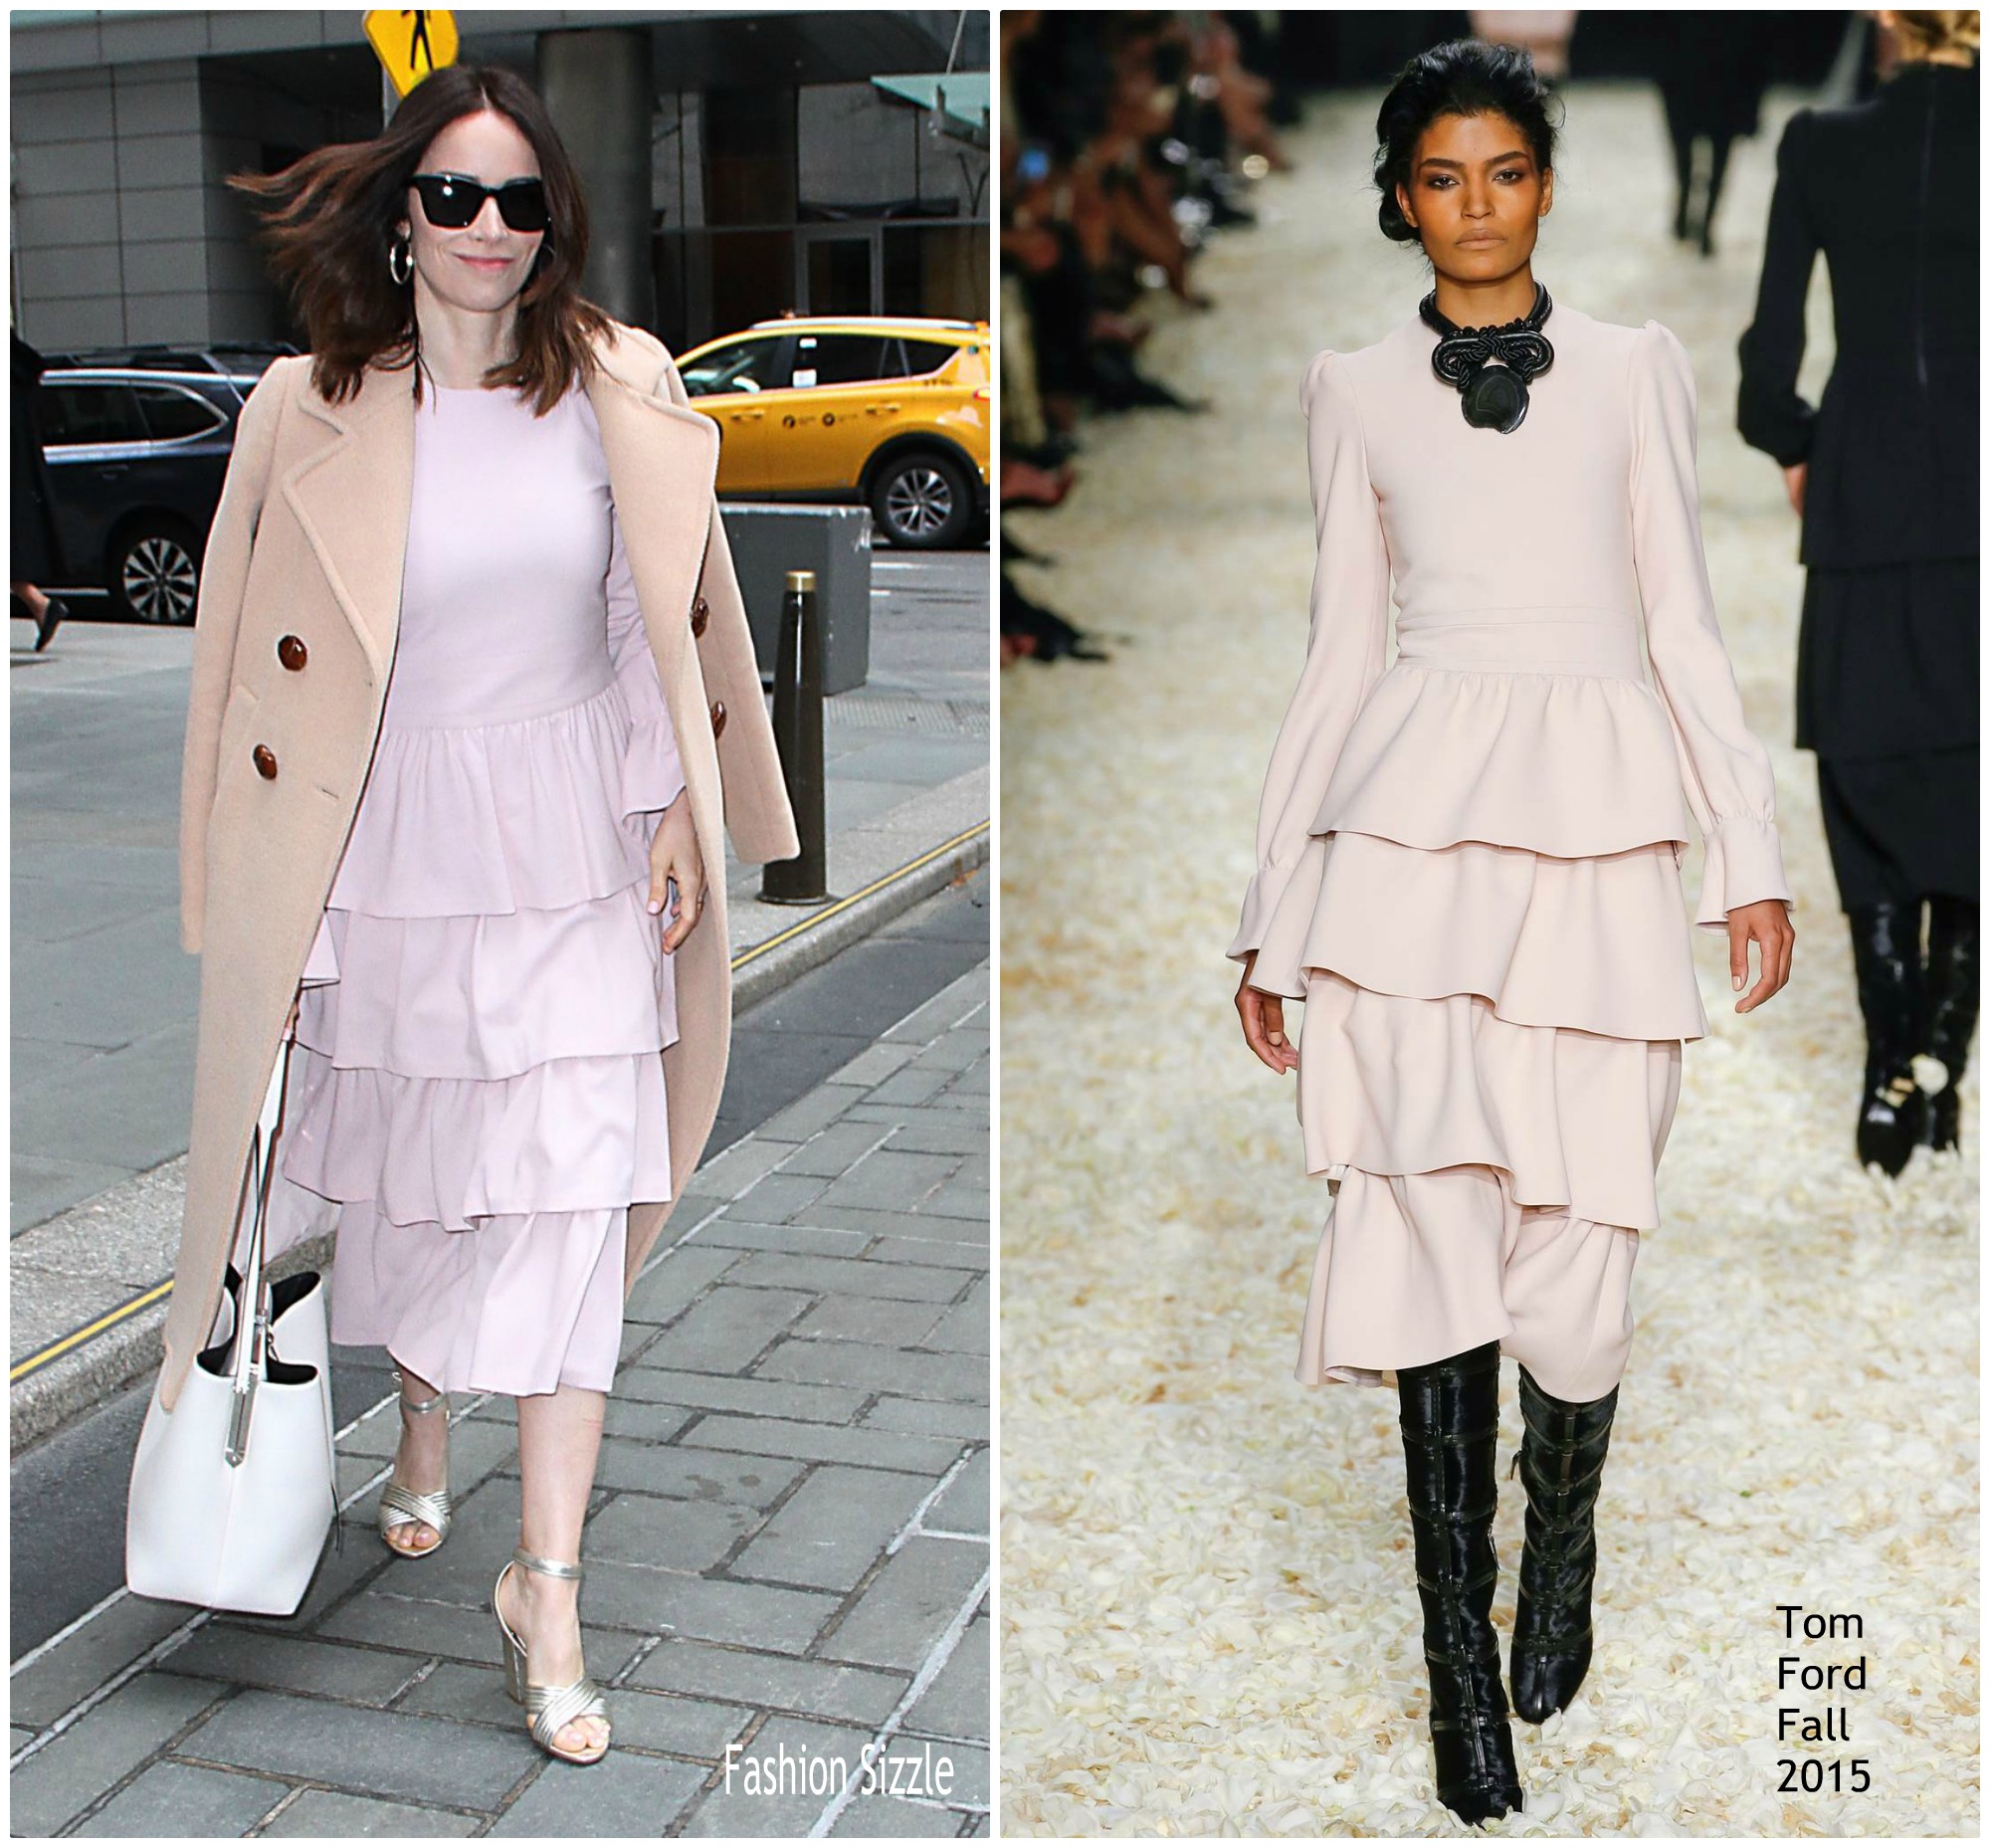 Abigail Spencer  In Chloe & Tom Ford   @ Today Show  In New York